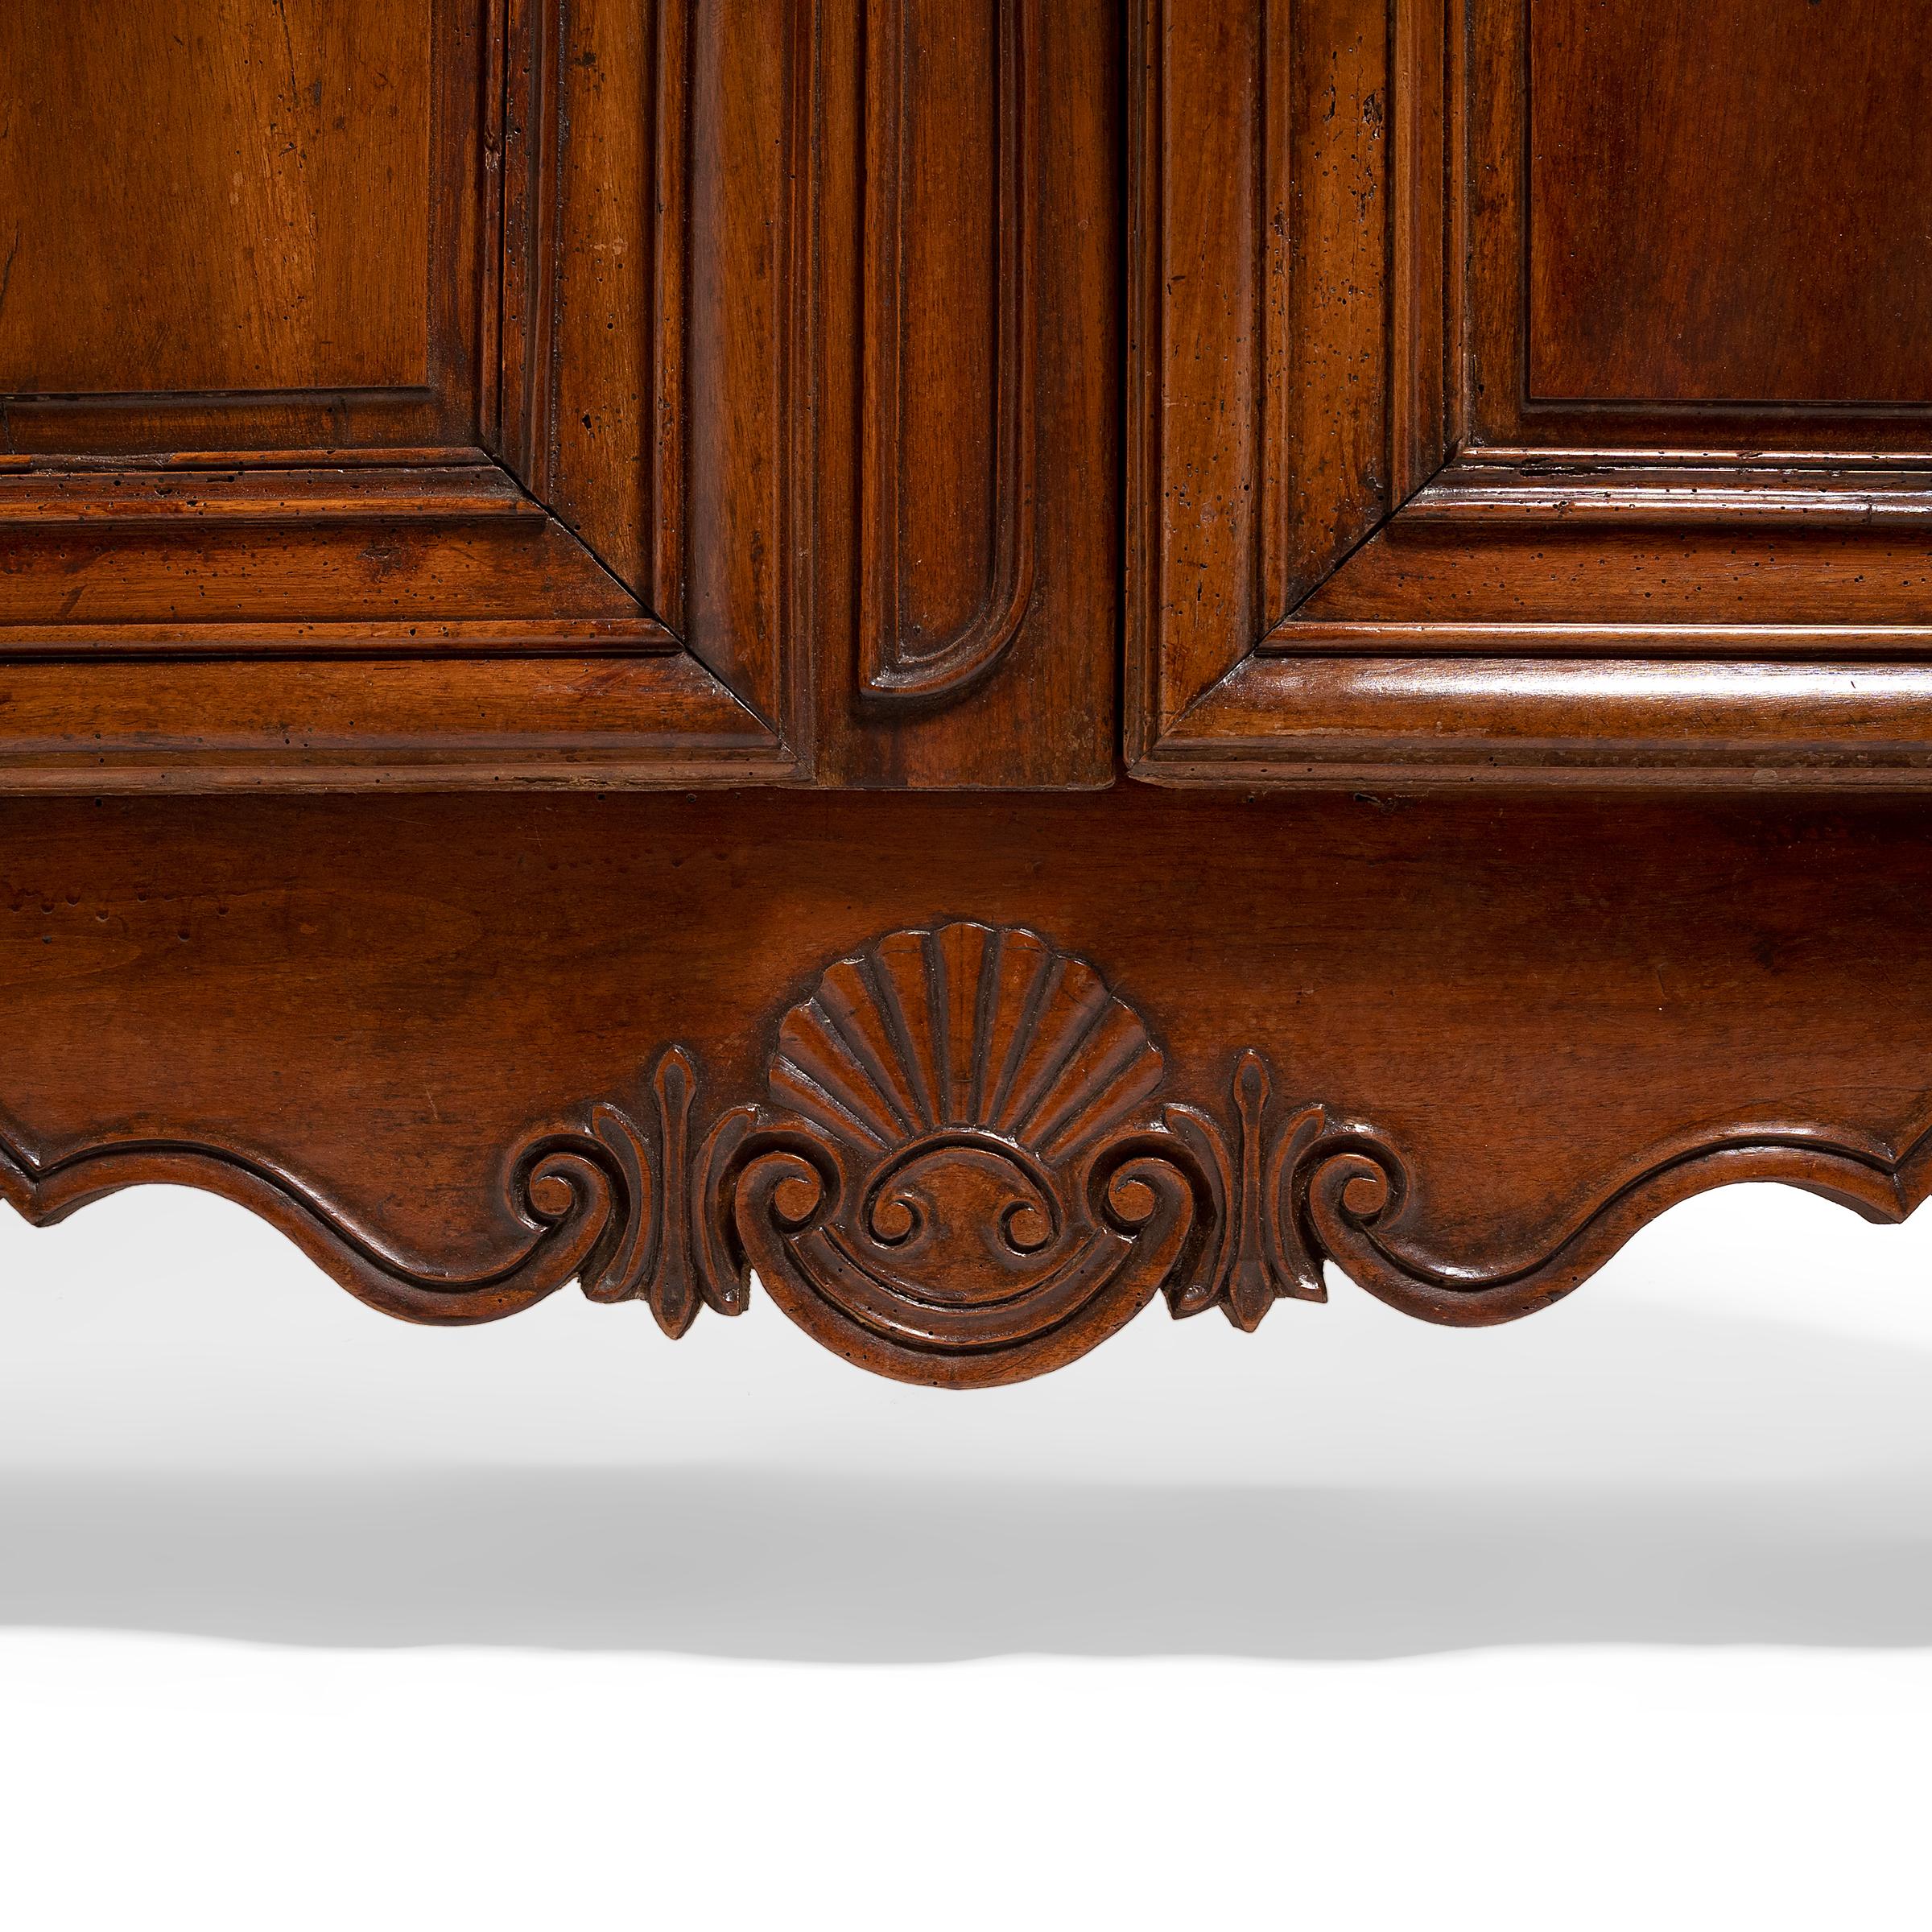 French Provincial Armoire with Arched Top, circa 1750 For Sale 2